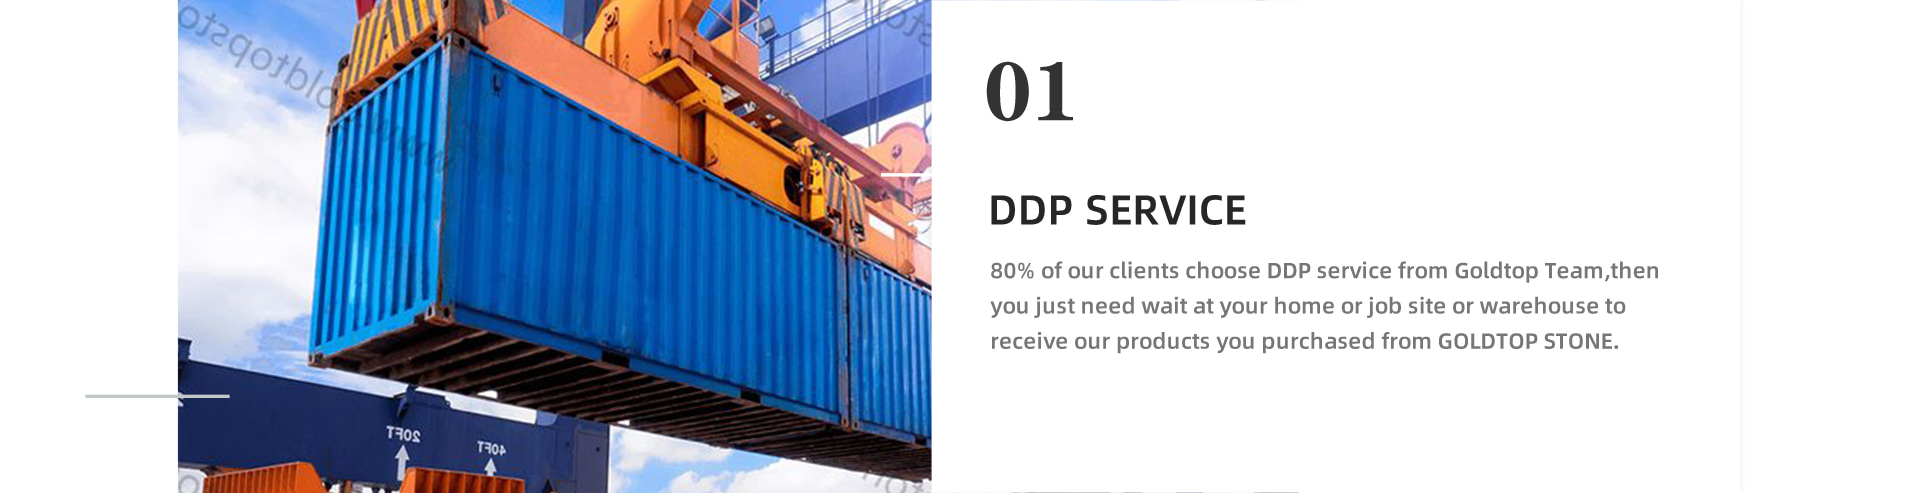 DDP SERVICE 80% of our clients choose DDP service from Goldtop Team,then you just need wait at your home or job site or warehouse to receive our products you purchased from GOLDTOP STONE.